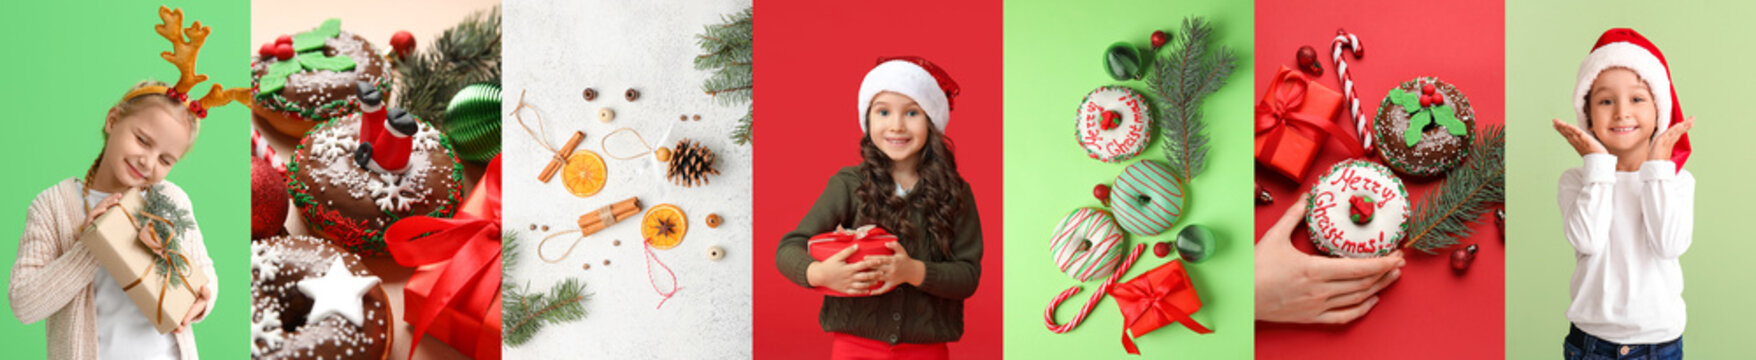 Winter collage with little children in stylish clothes, with Christmas gifts, decorations and tasty donuts